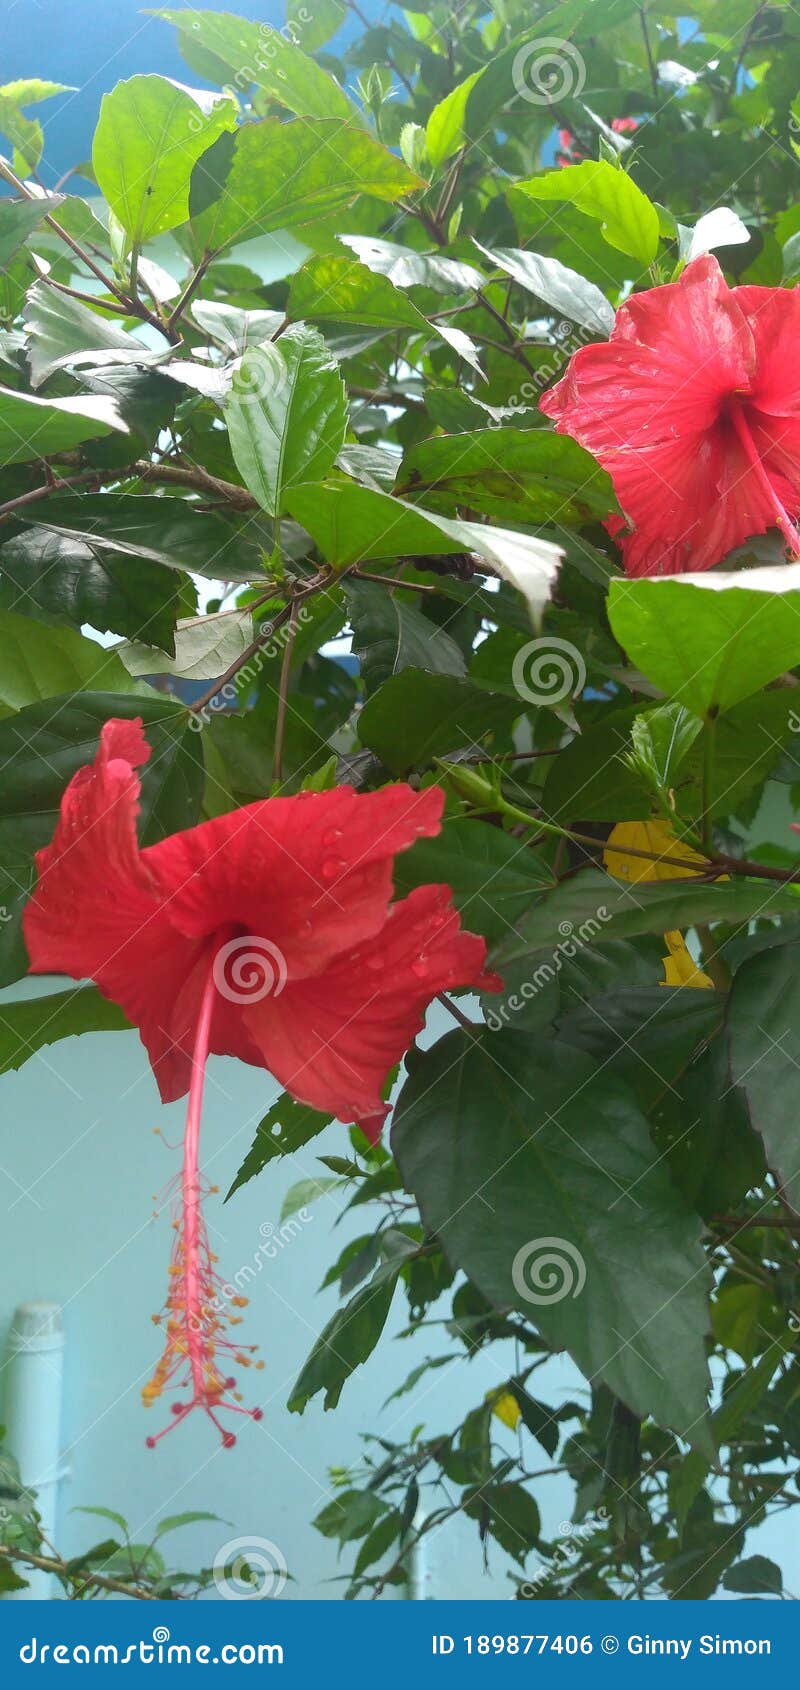 hibiscus rosa sinesis is a common flowers red in color